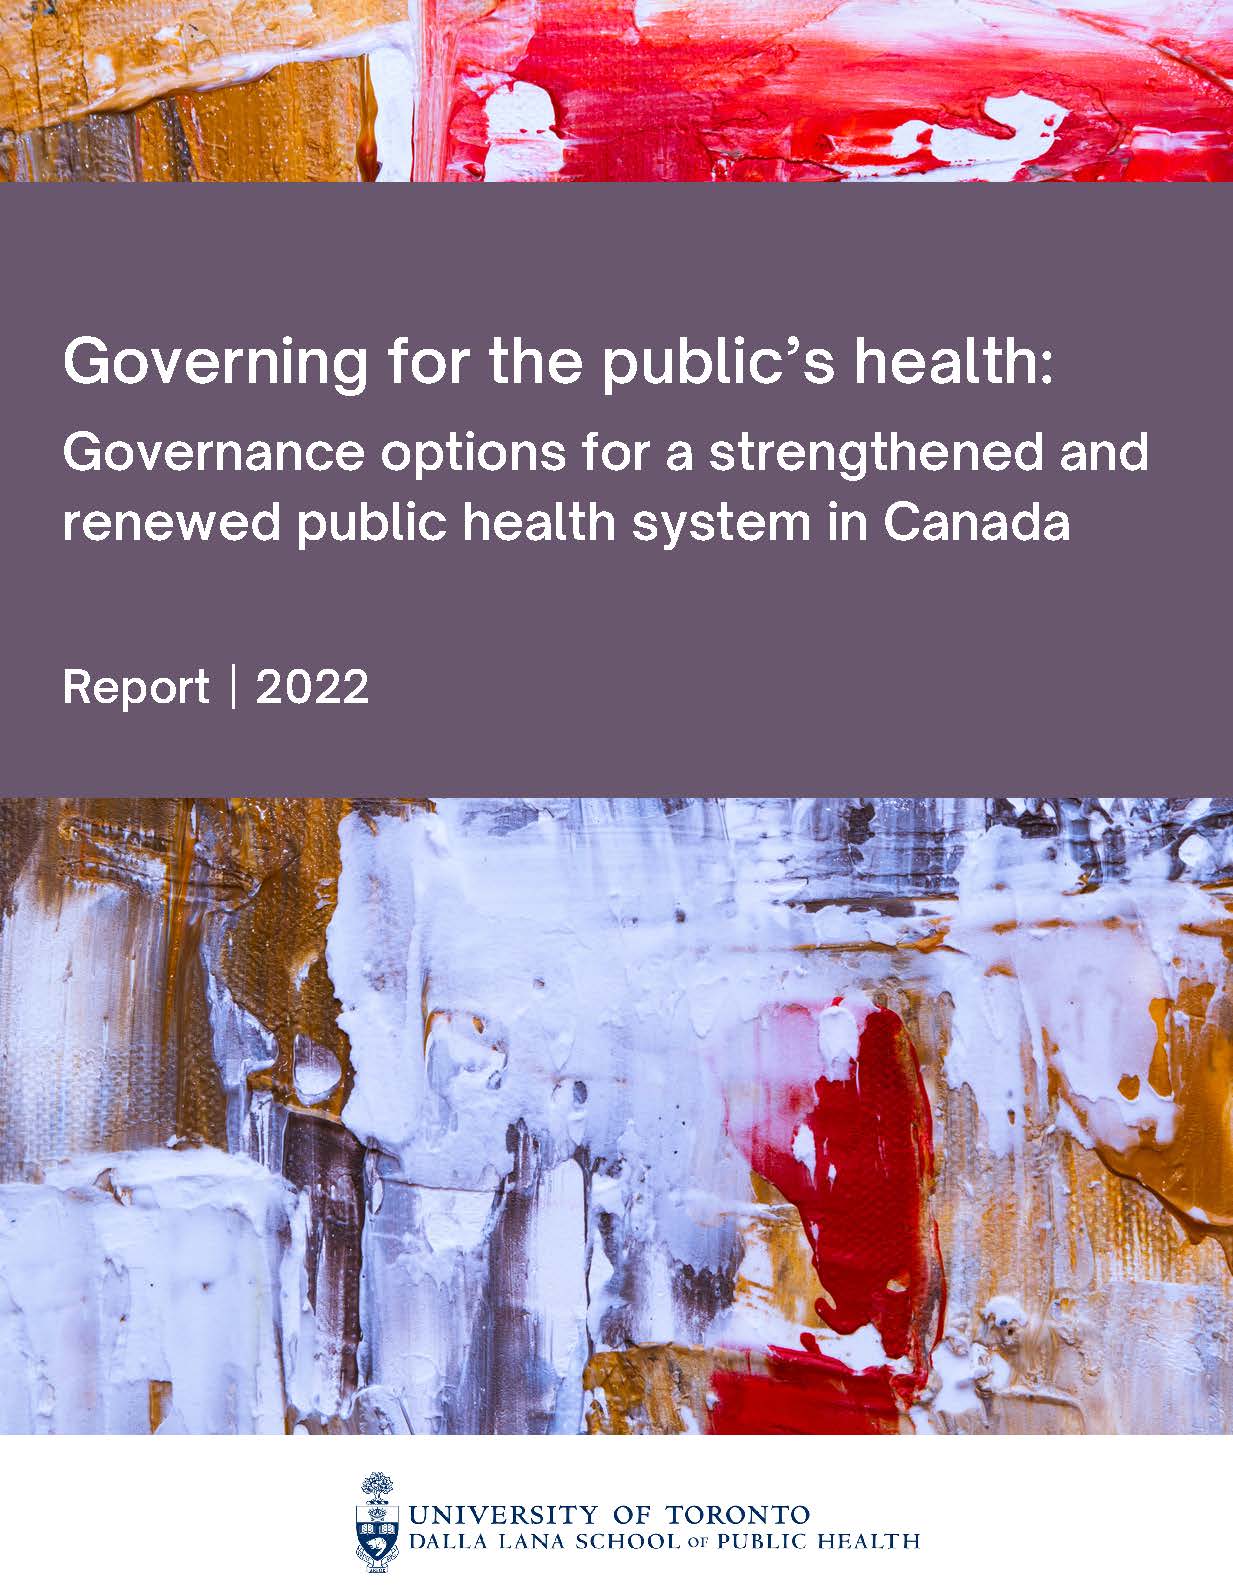 Report – Governing for the Public’s Health: Governance Options for a Strengthened and Renewed Public Health System in Canada